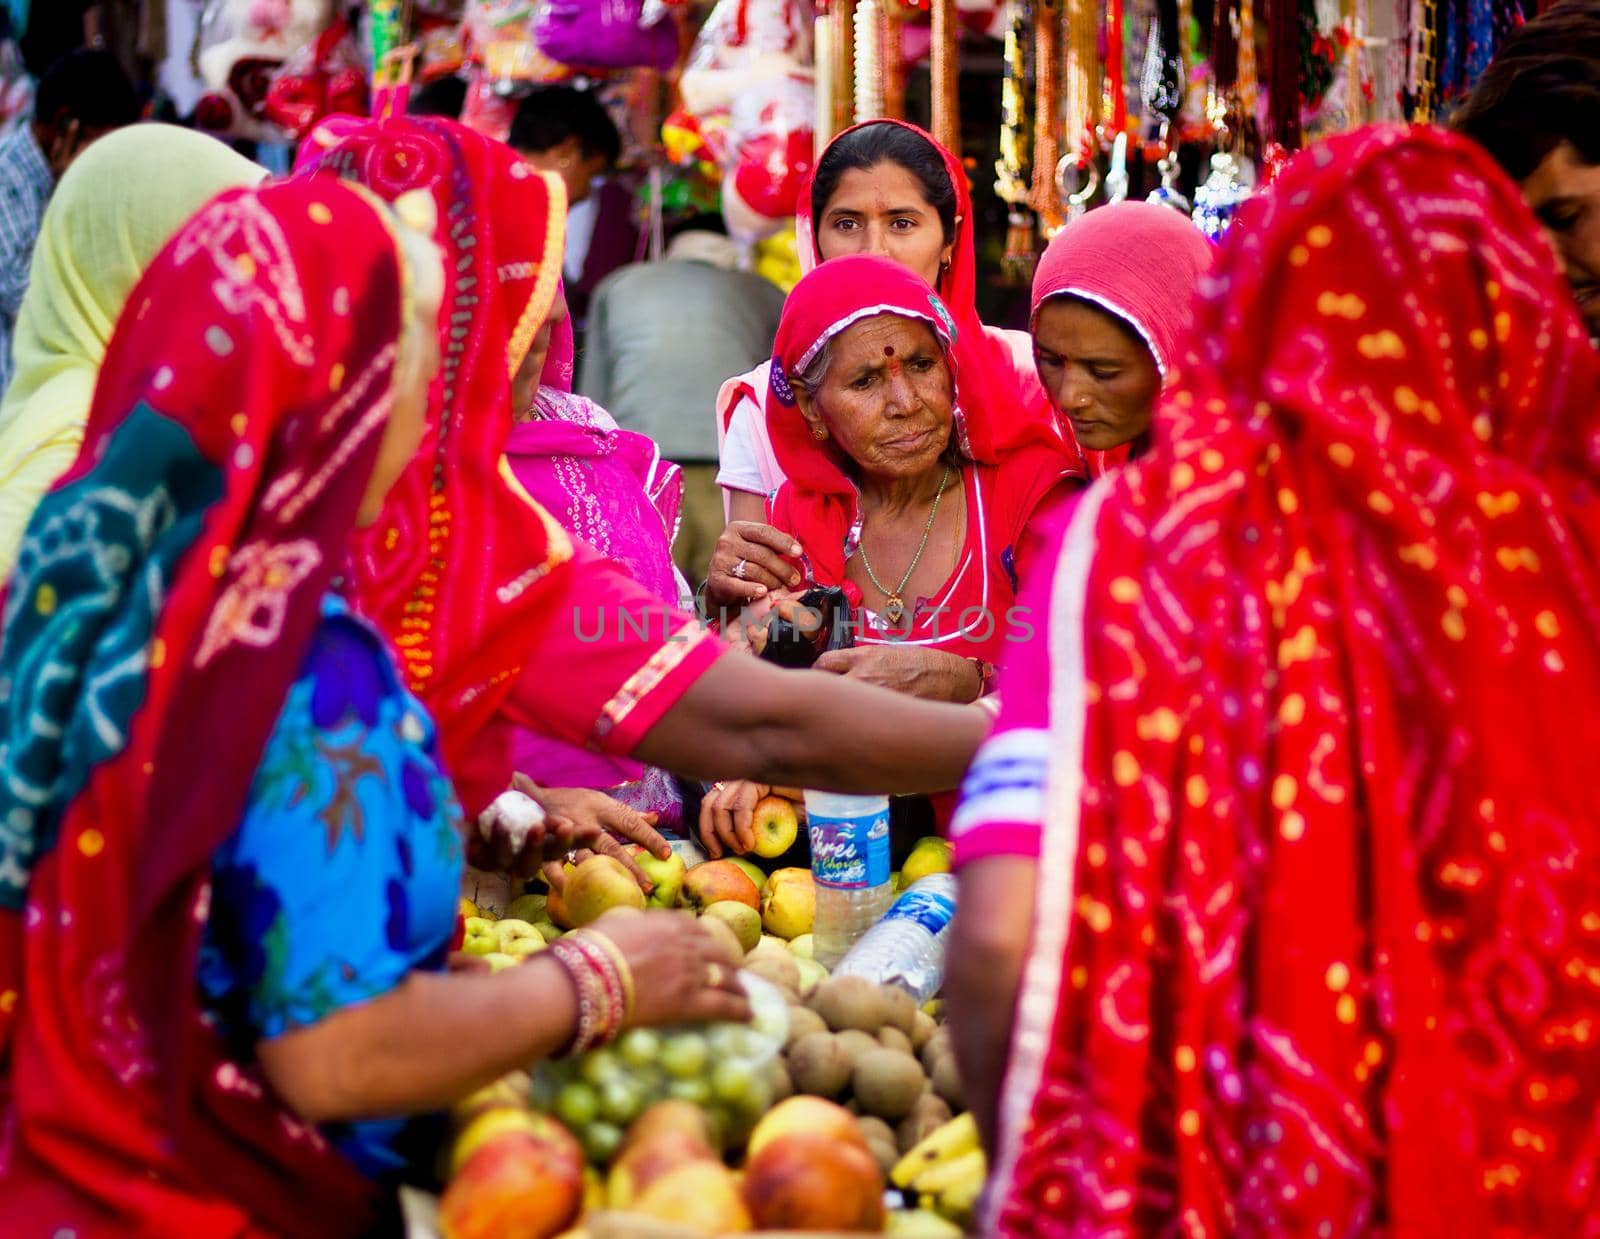 Pushkar, India - November 10, 2016: Few Indian women in colorful saree while covering their head buying fruits in group in the state of Rajasthan by arpanbhatia